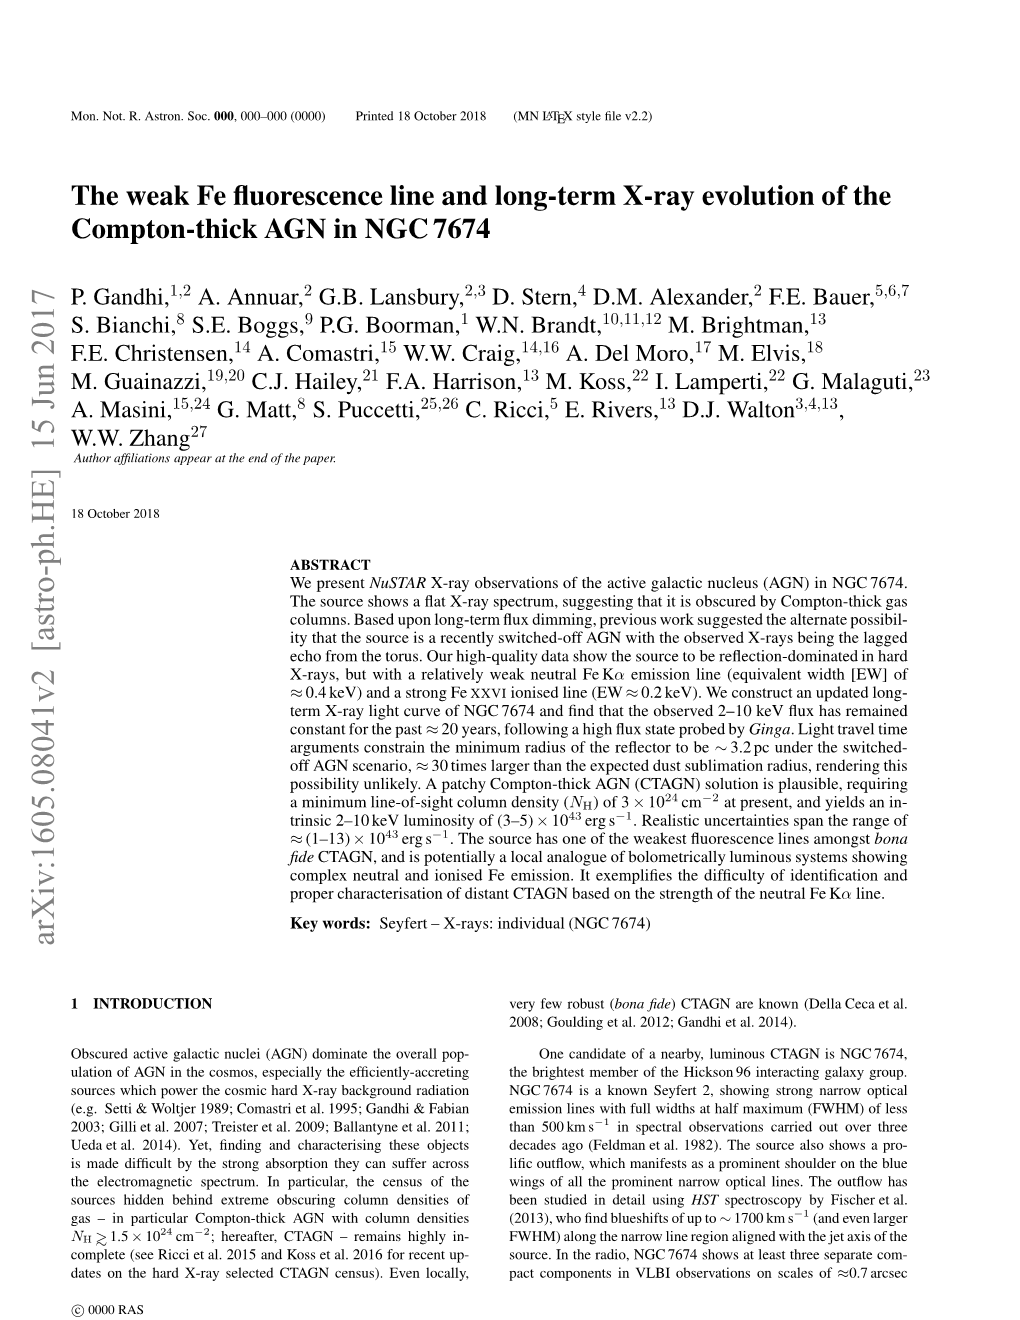 The Weak Neutral Fe Fluorescence Line and Long-Term X-Ray Evolution Of